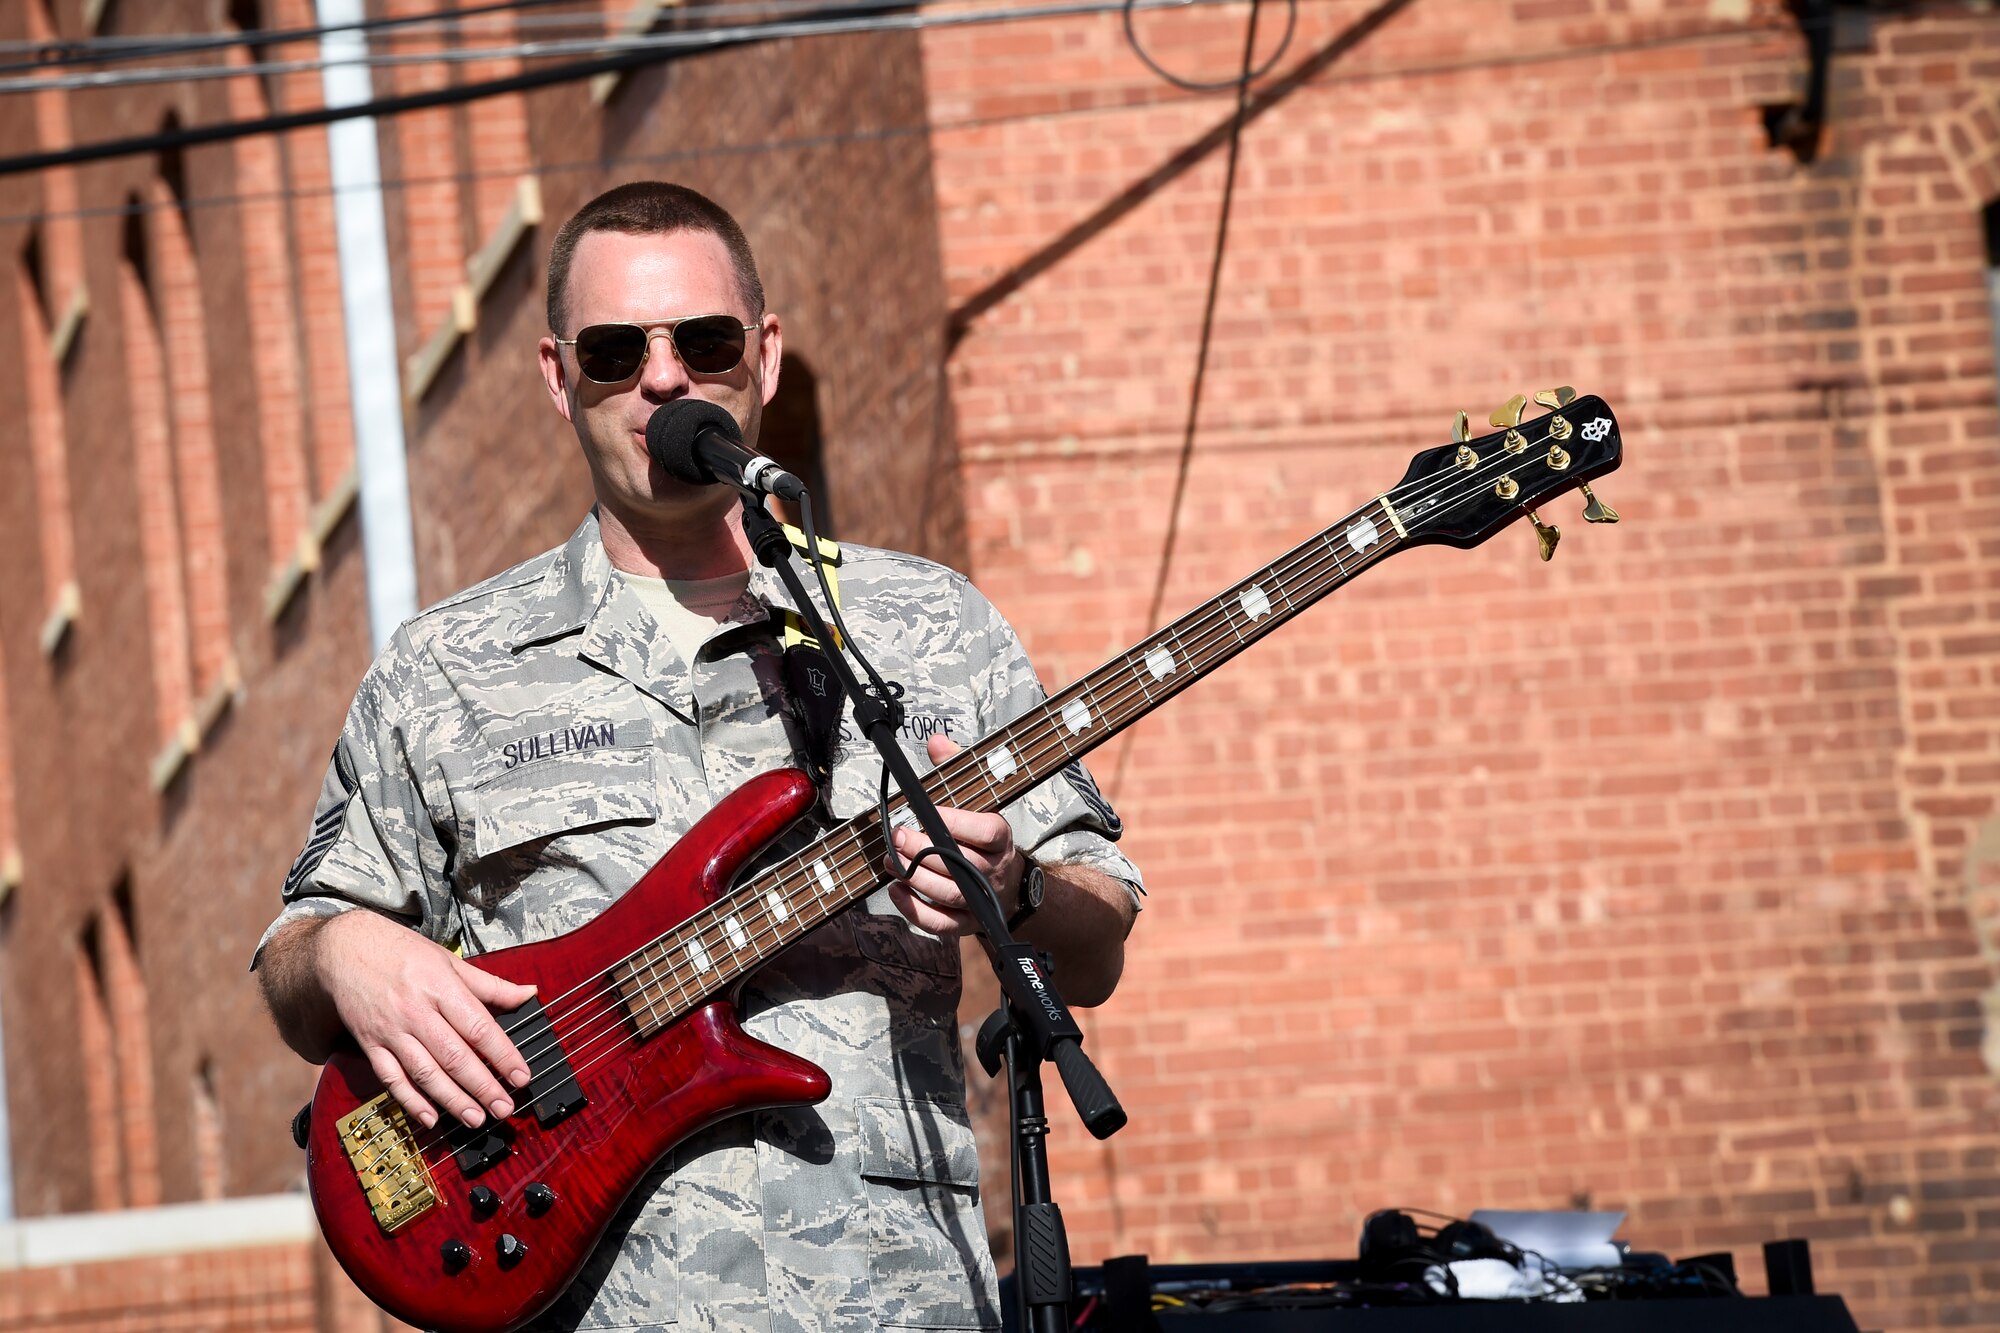 Master Sgt. Eric Sullivan, United States Air Force Band’s Celtic Aire vocalist and bassist, sings “Galway Girl” during a performance at the Wichita Falls Irish Street Festival in Wichita Falls, Texas, March 12, 2016. The band is the premier Celtic and folk ensemble of the U.S. Air Force Band. (U.S. Air Force photo by Senior Airman Ryan J. Sonnier/RELEASED)